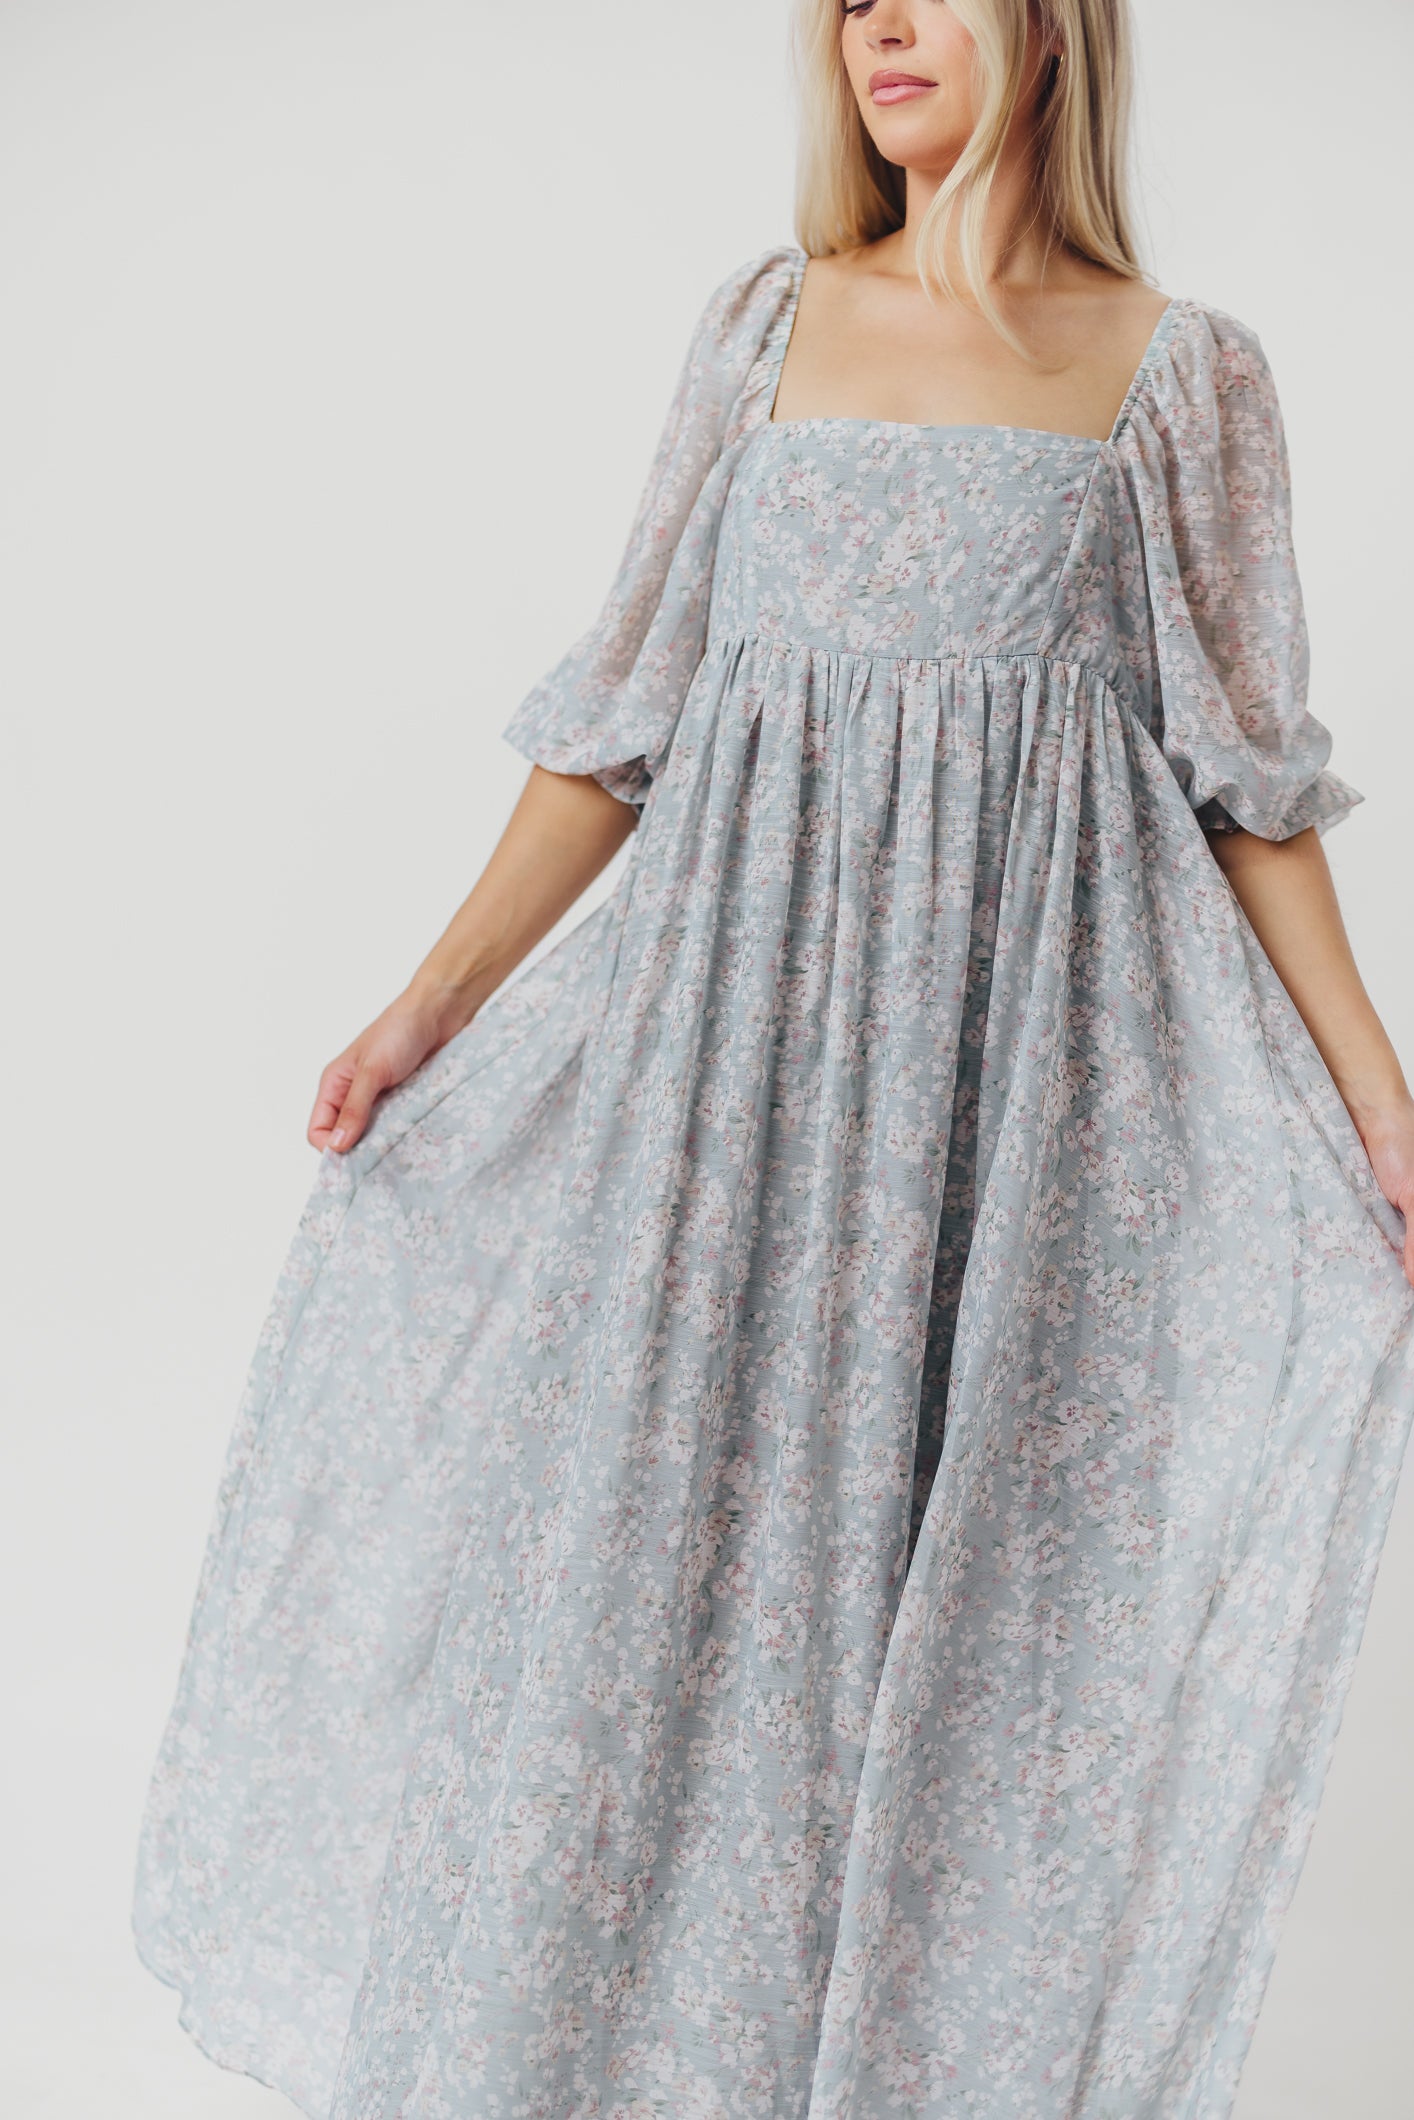 *New* Mona Maxi Dress with Smocking in Sage Green Floral - Bump Friendly & Inclusive Sizing (S-3XL)